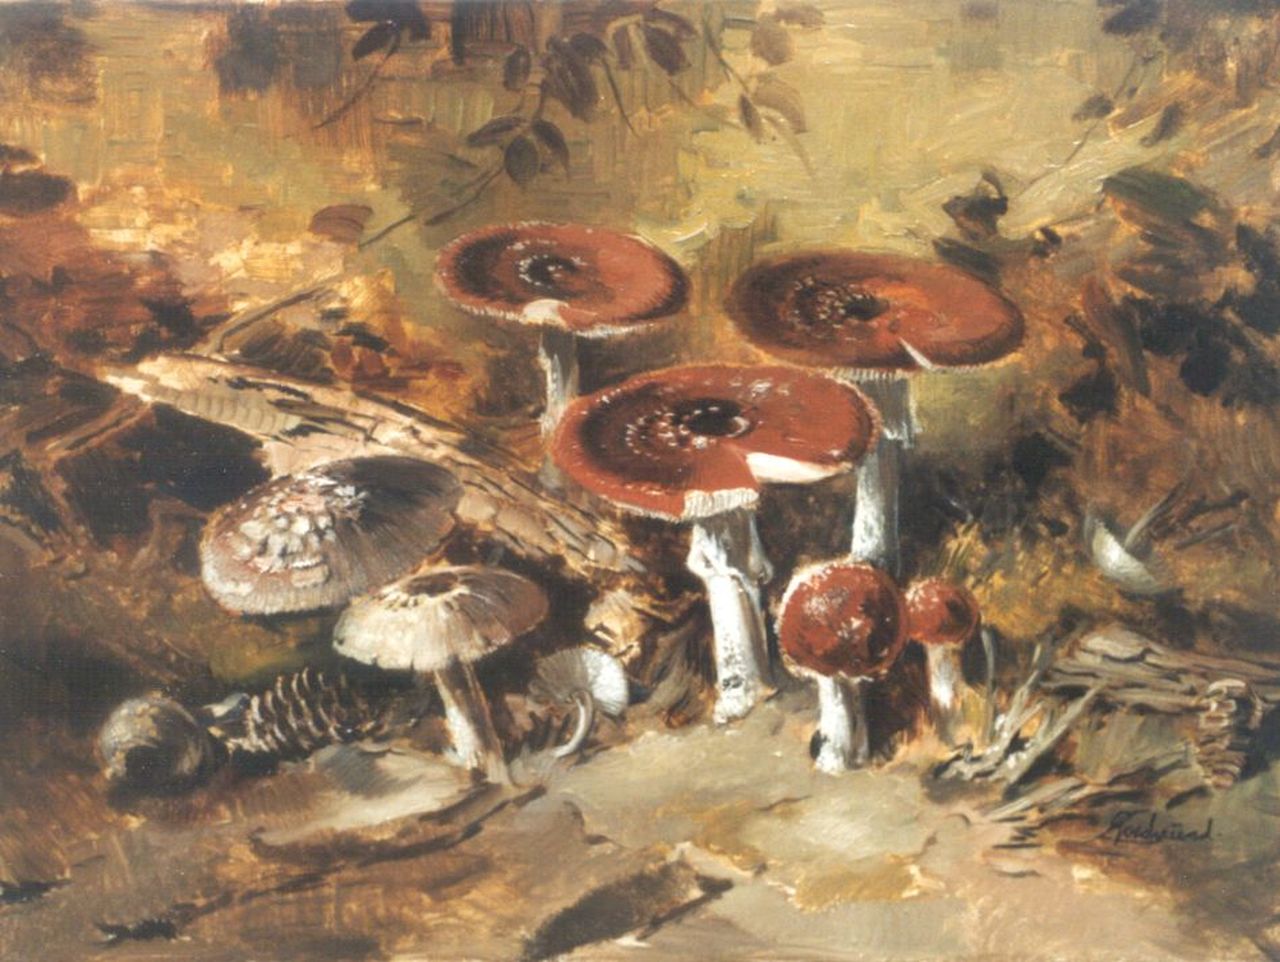 Goedvriend Th.F.  | Theodoor Franciscus 'Theo' Goedvriend, Mushrooms, oil on canvas 60.2 x 80.0 cm, signed l.r.